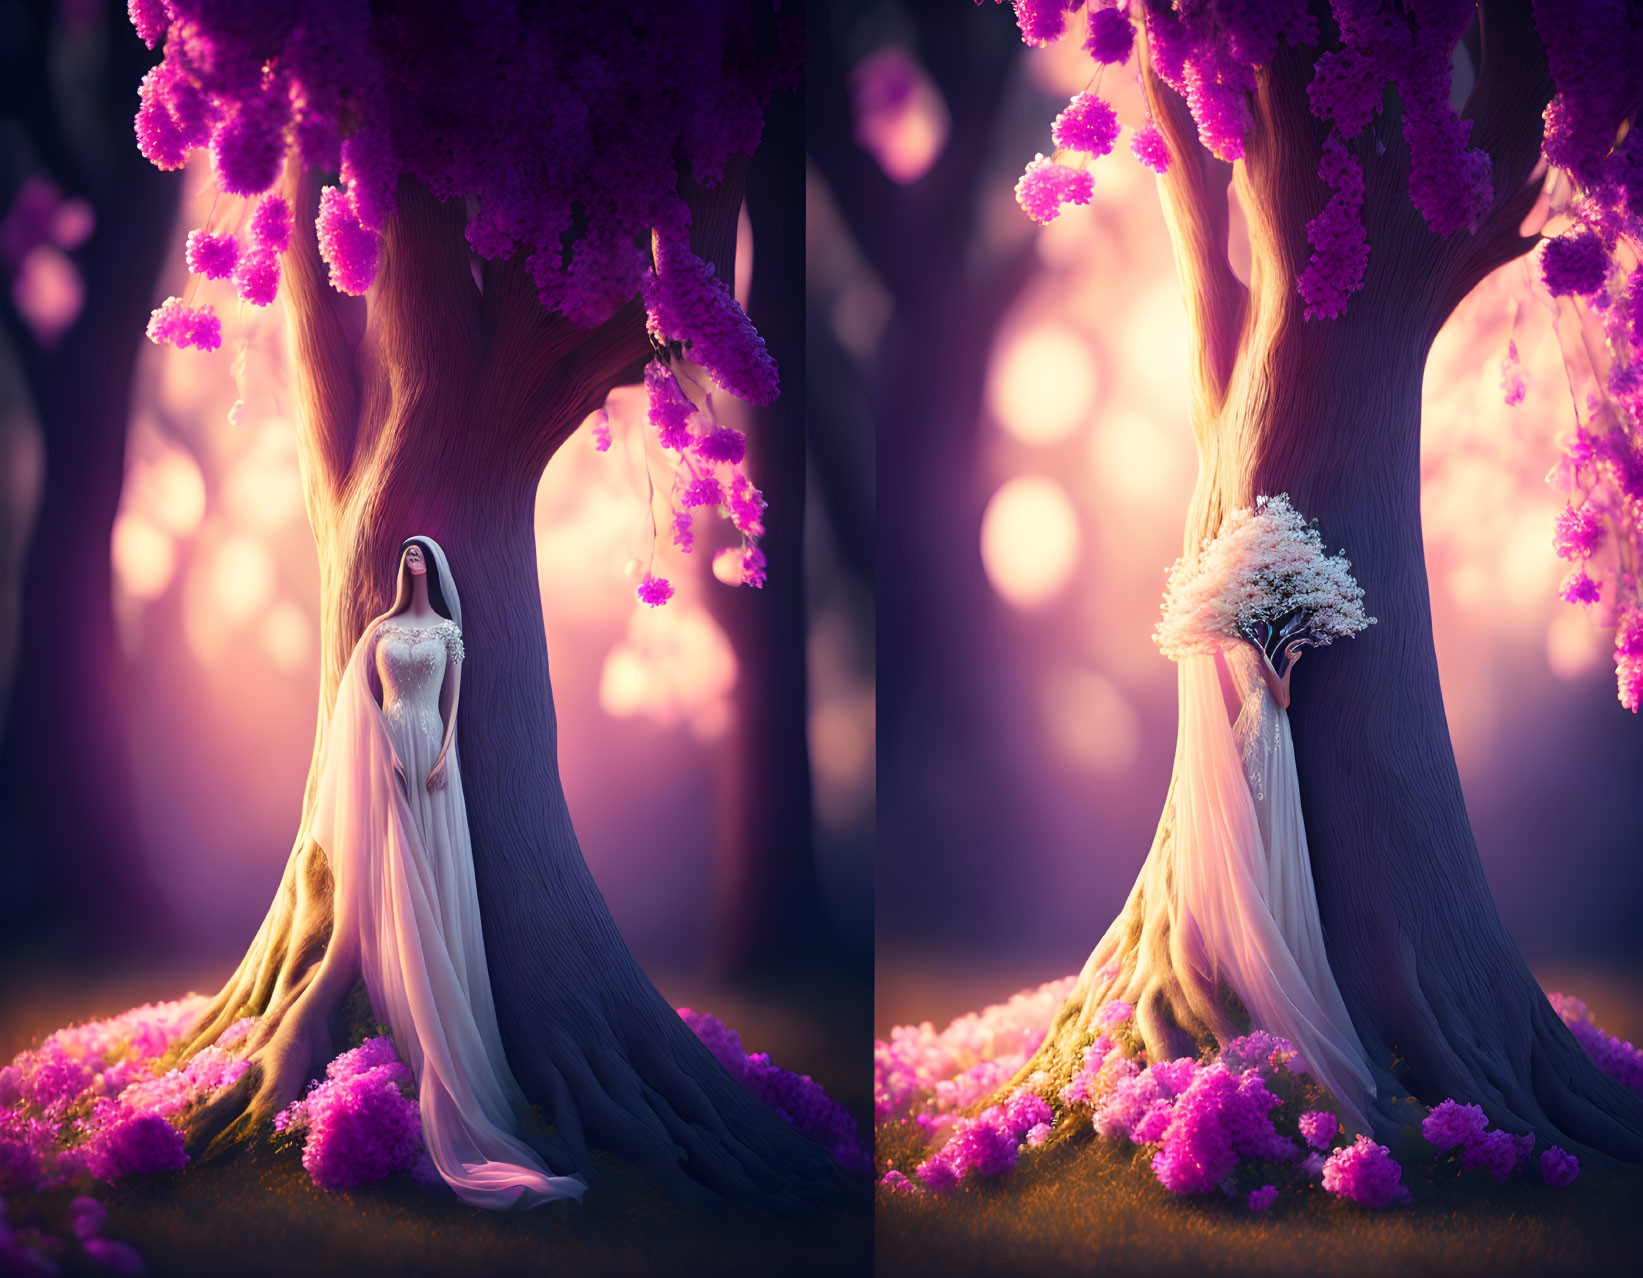 Mystical forest with woman in long dress by vibrant purple blossoms